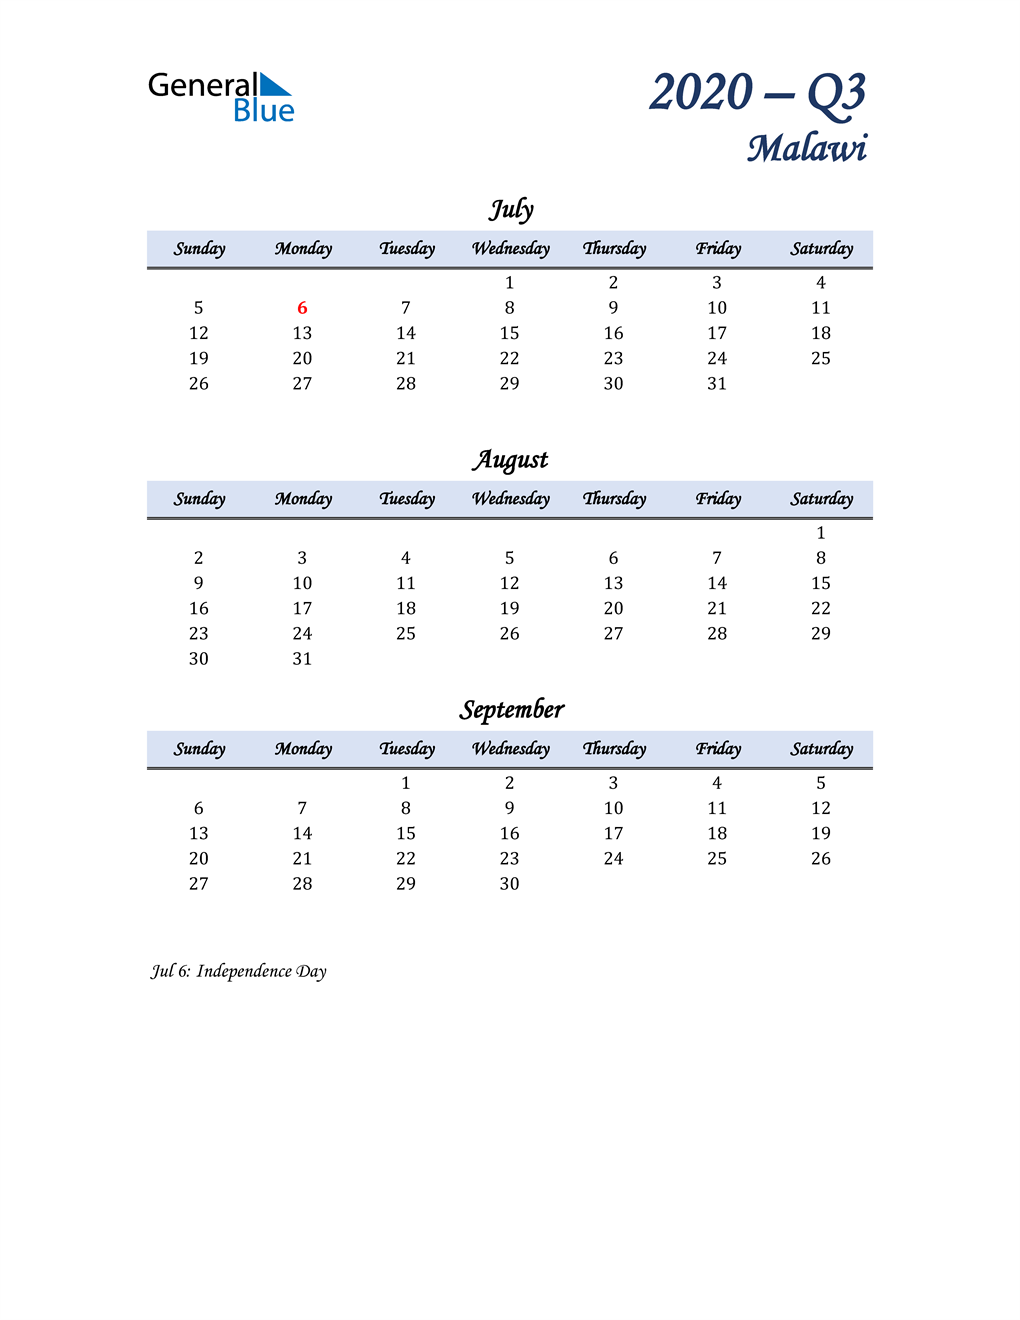  July, August, and September Calendar for Malawi